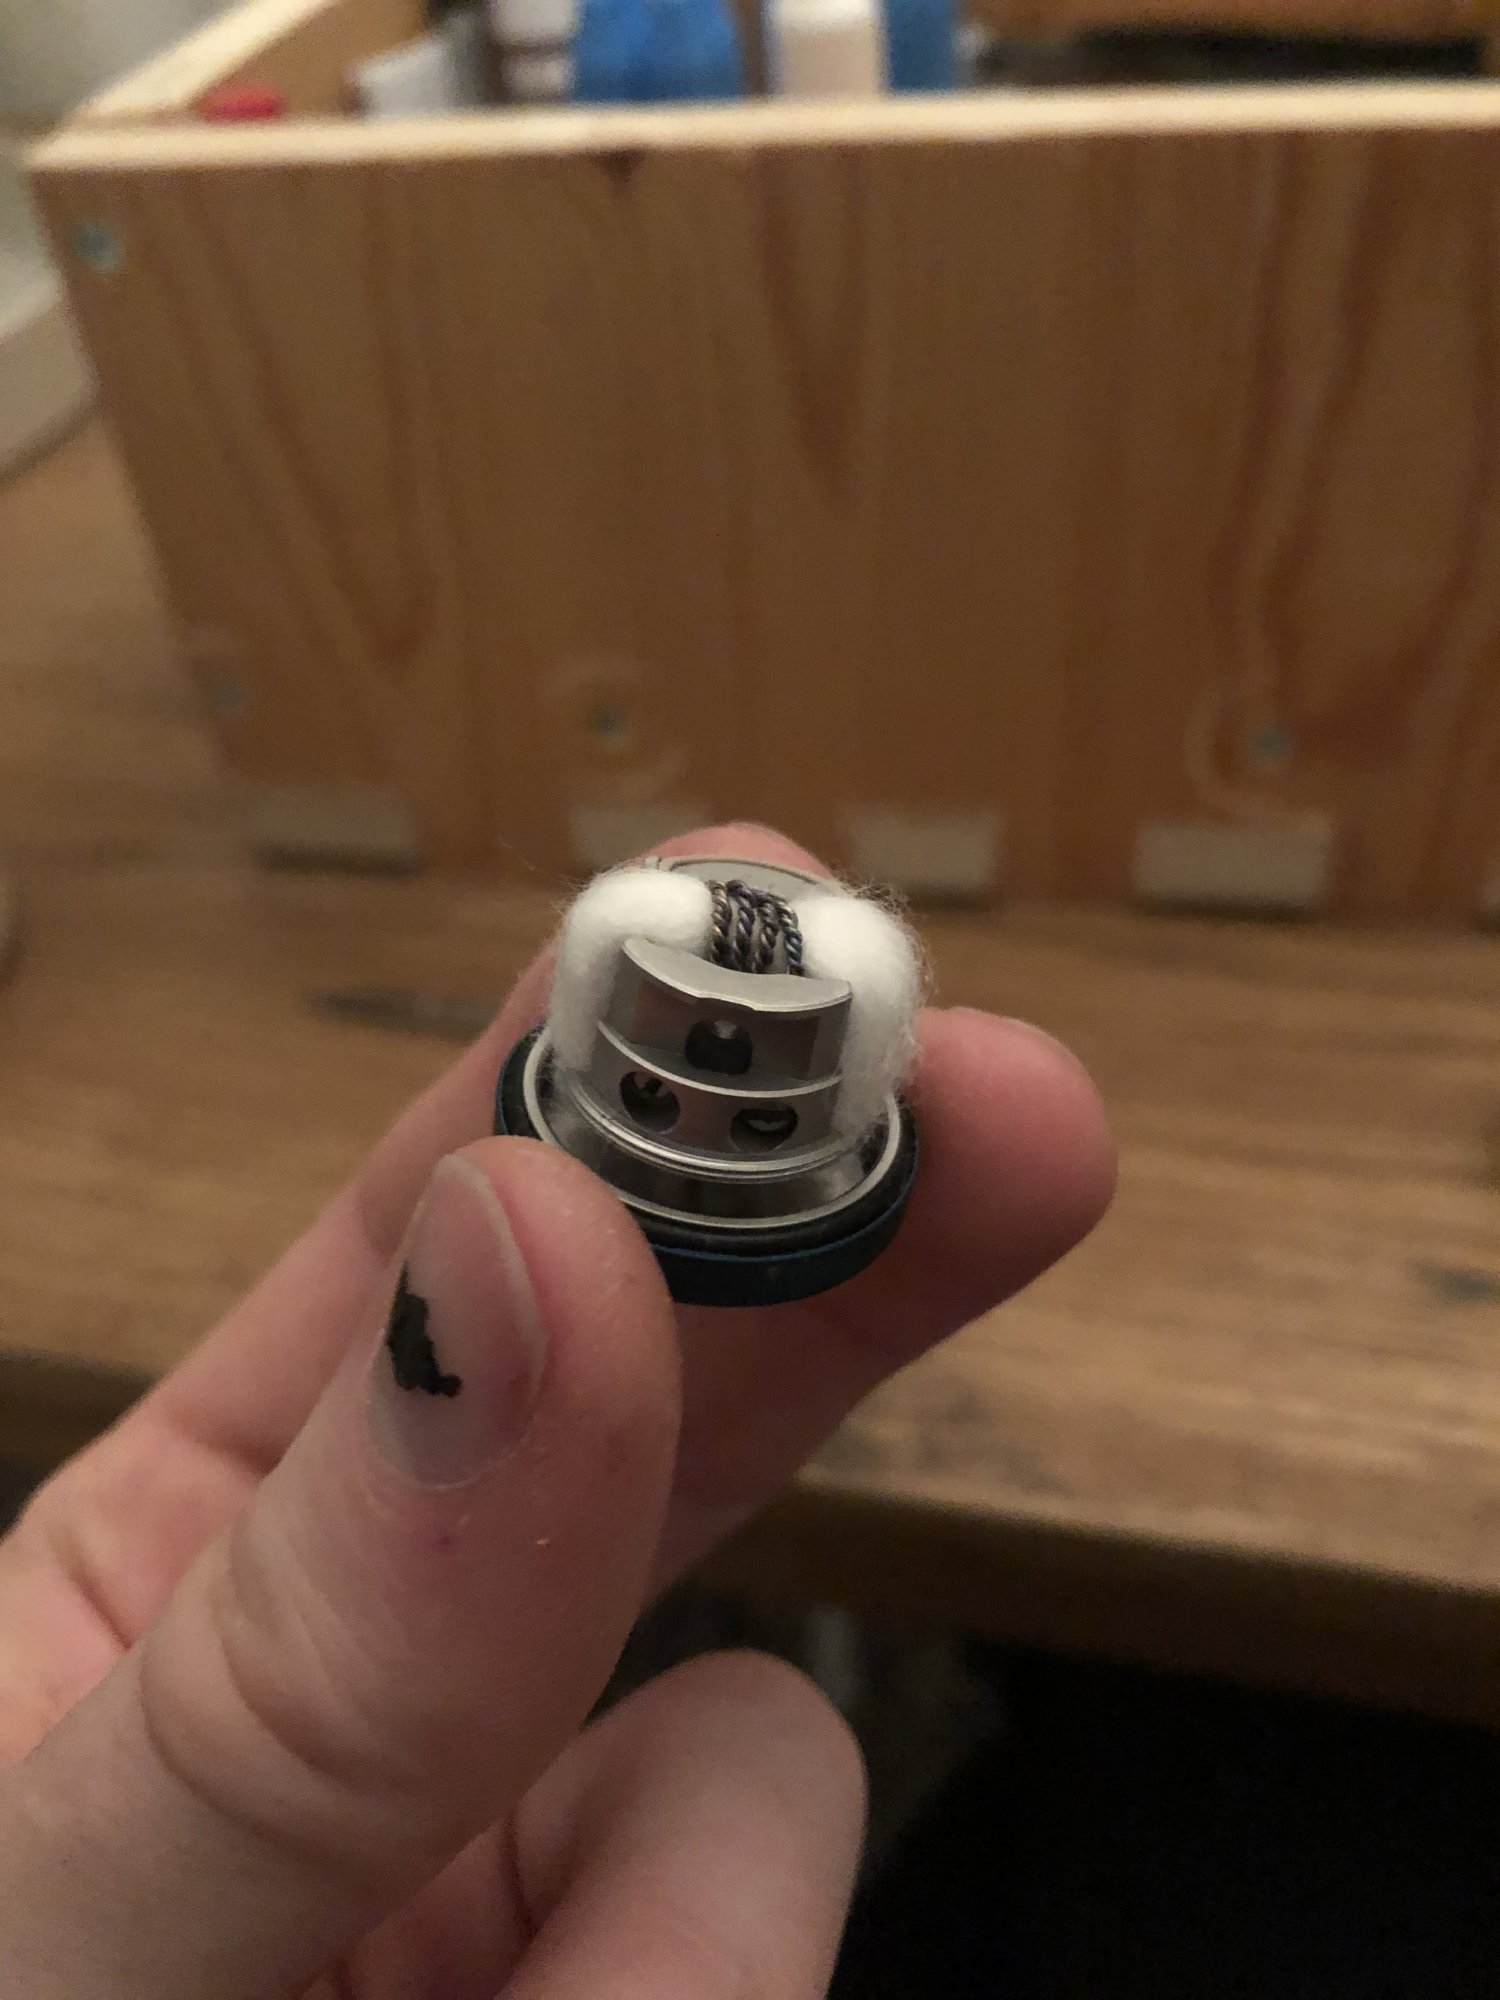 Yet another wicking and coil